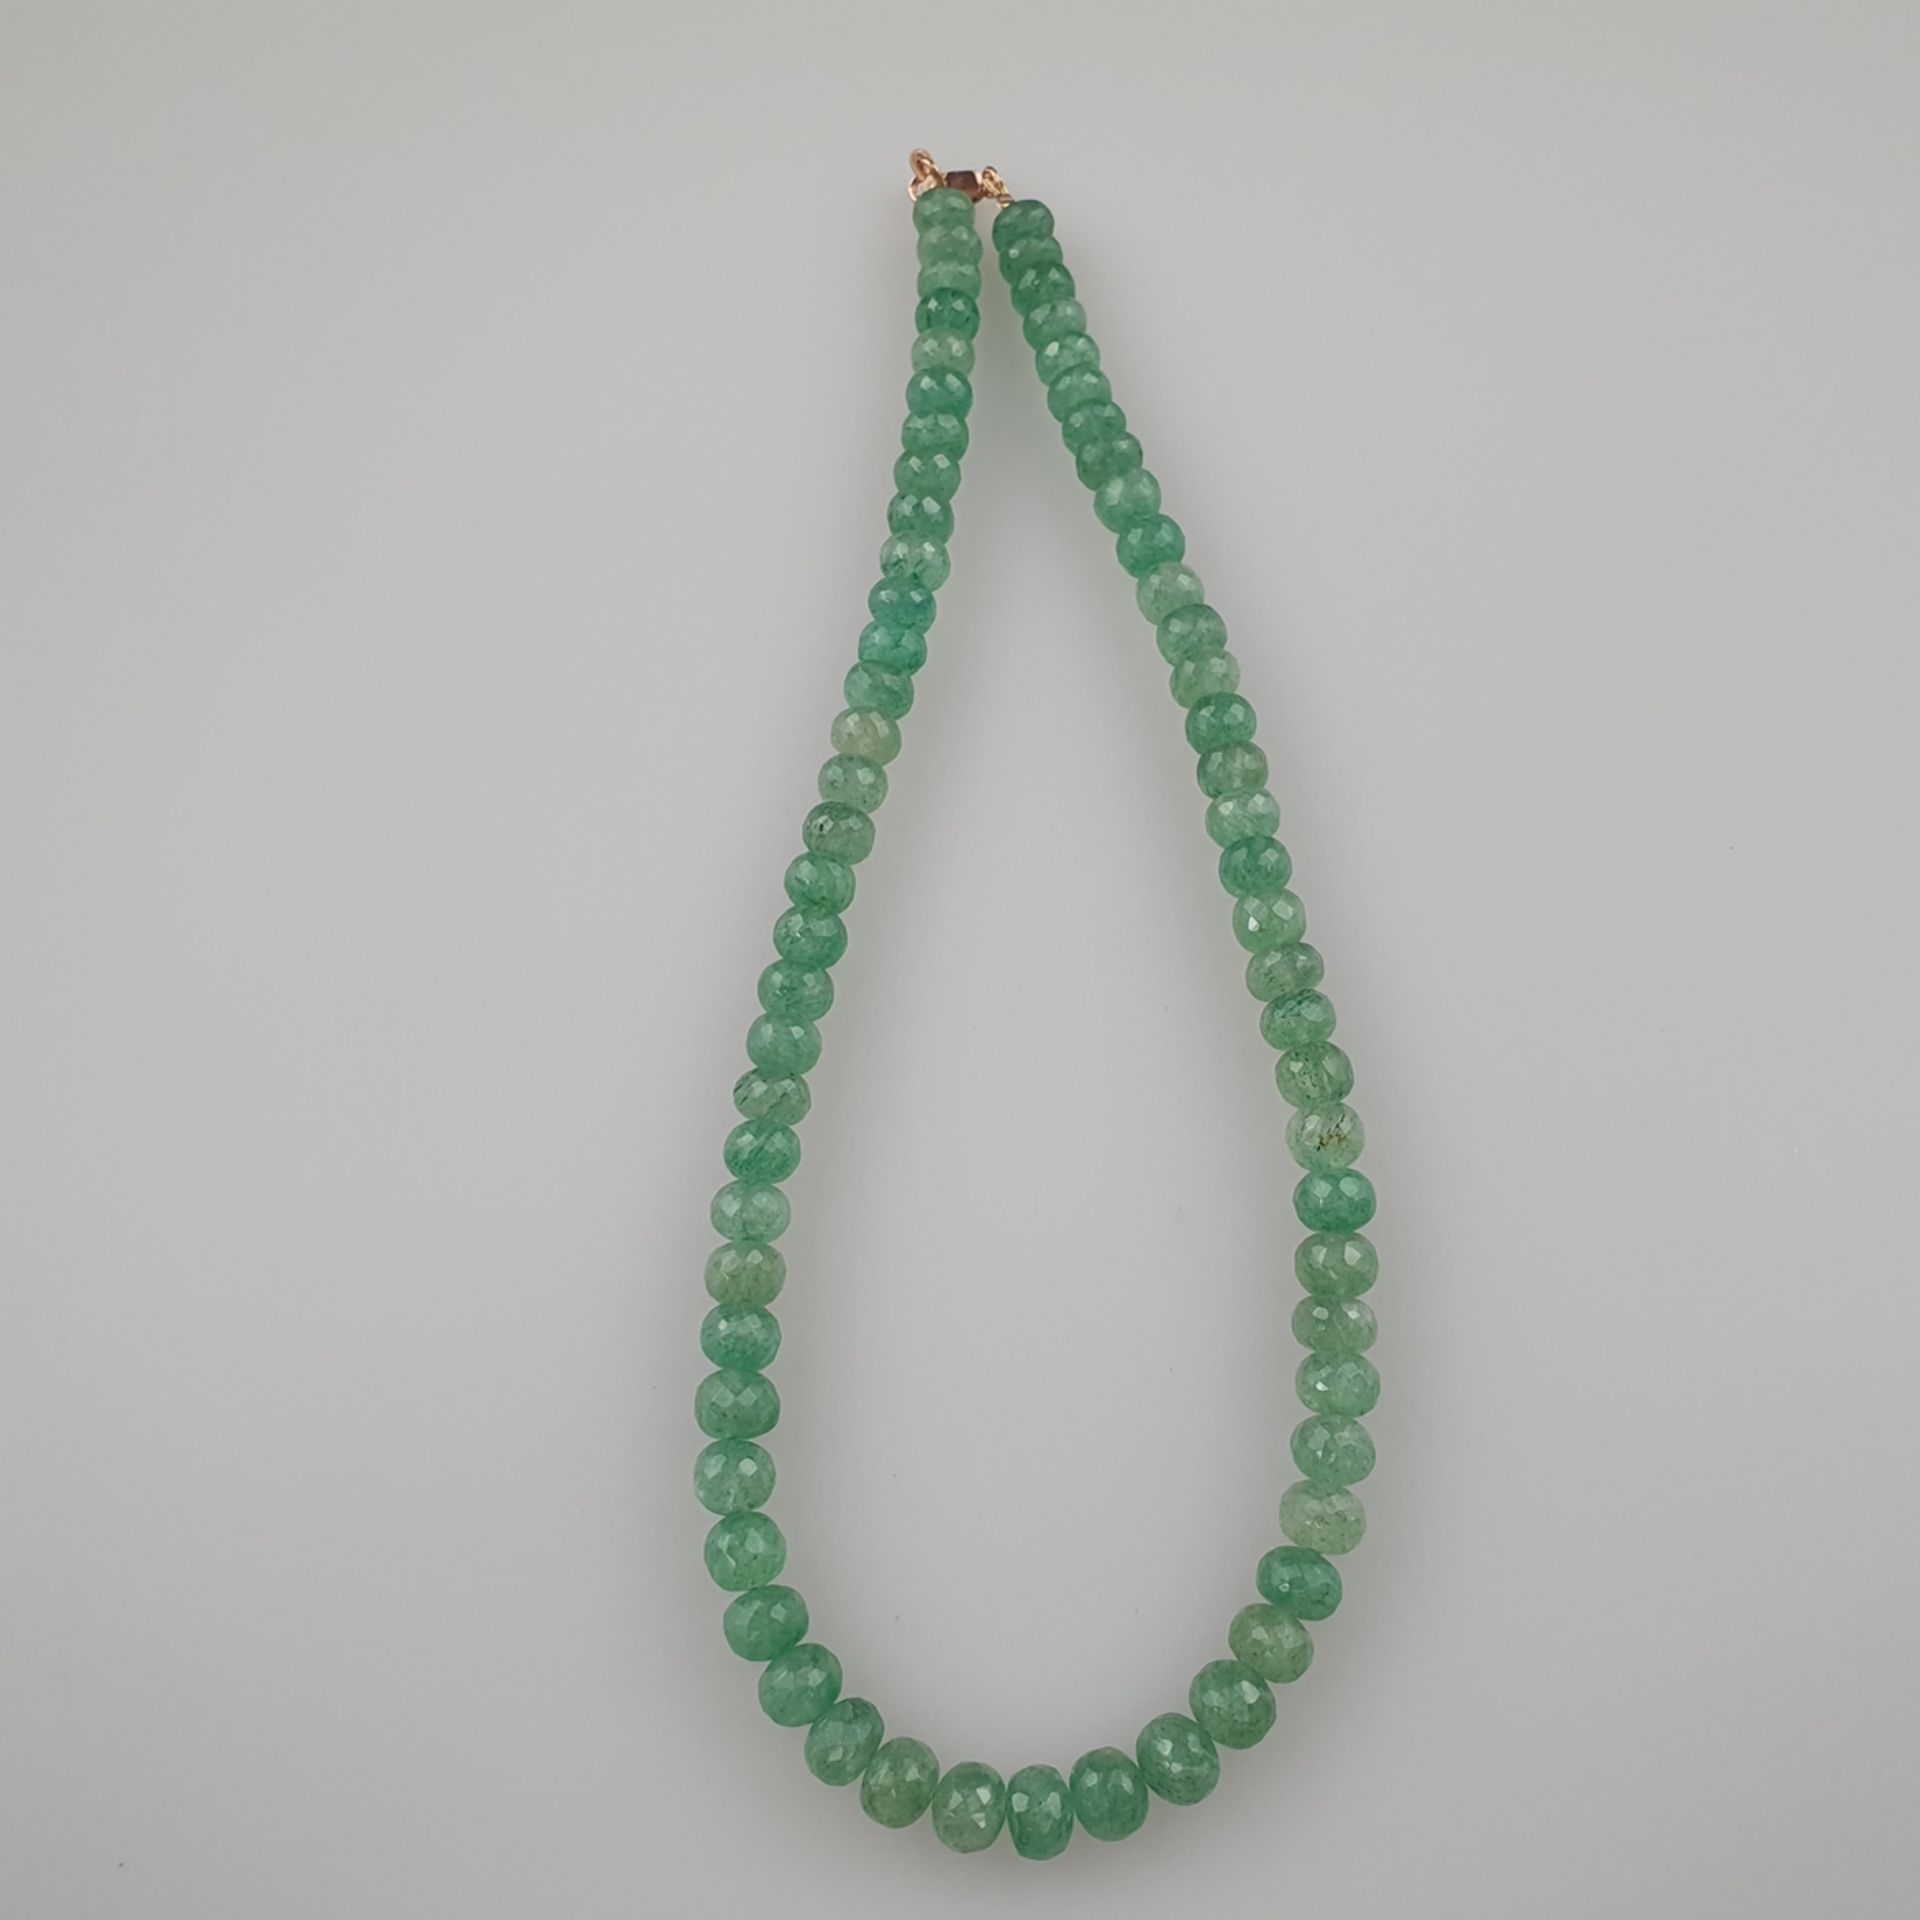 258cts Faceted Beryl Emerald Beads Necklace, L. ca. 45 cm,  ca. 50 Gramm - Image 3 of 6